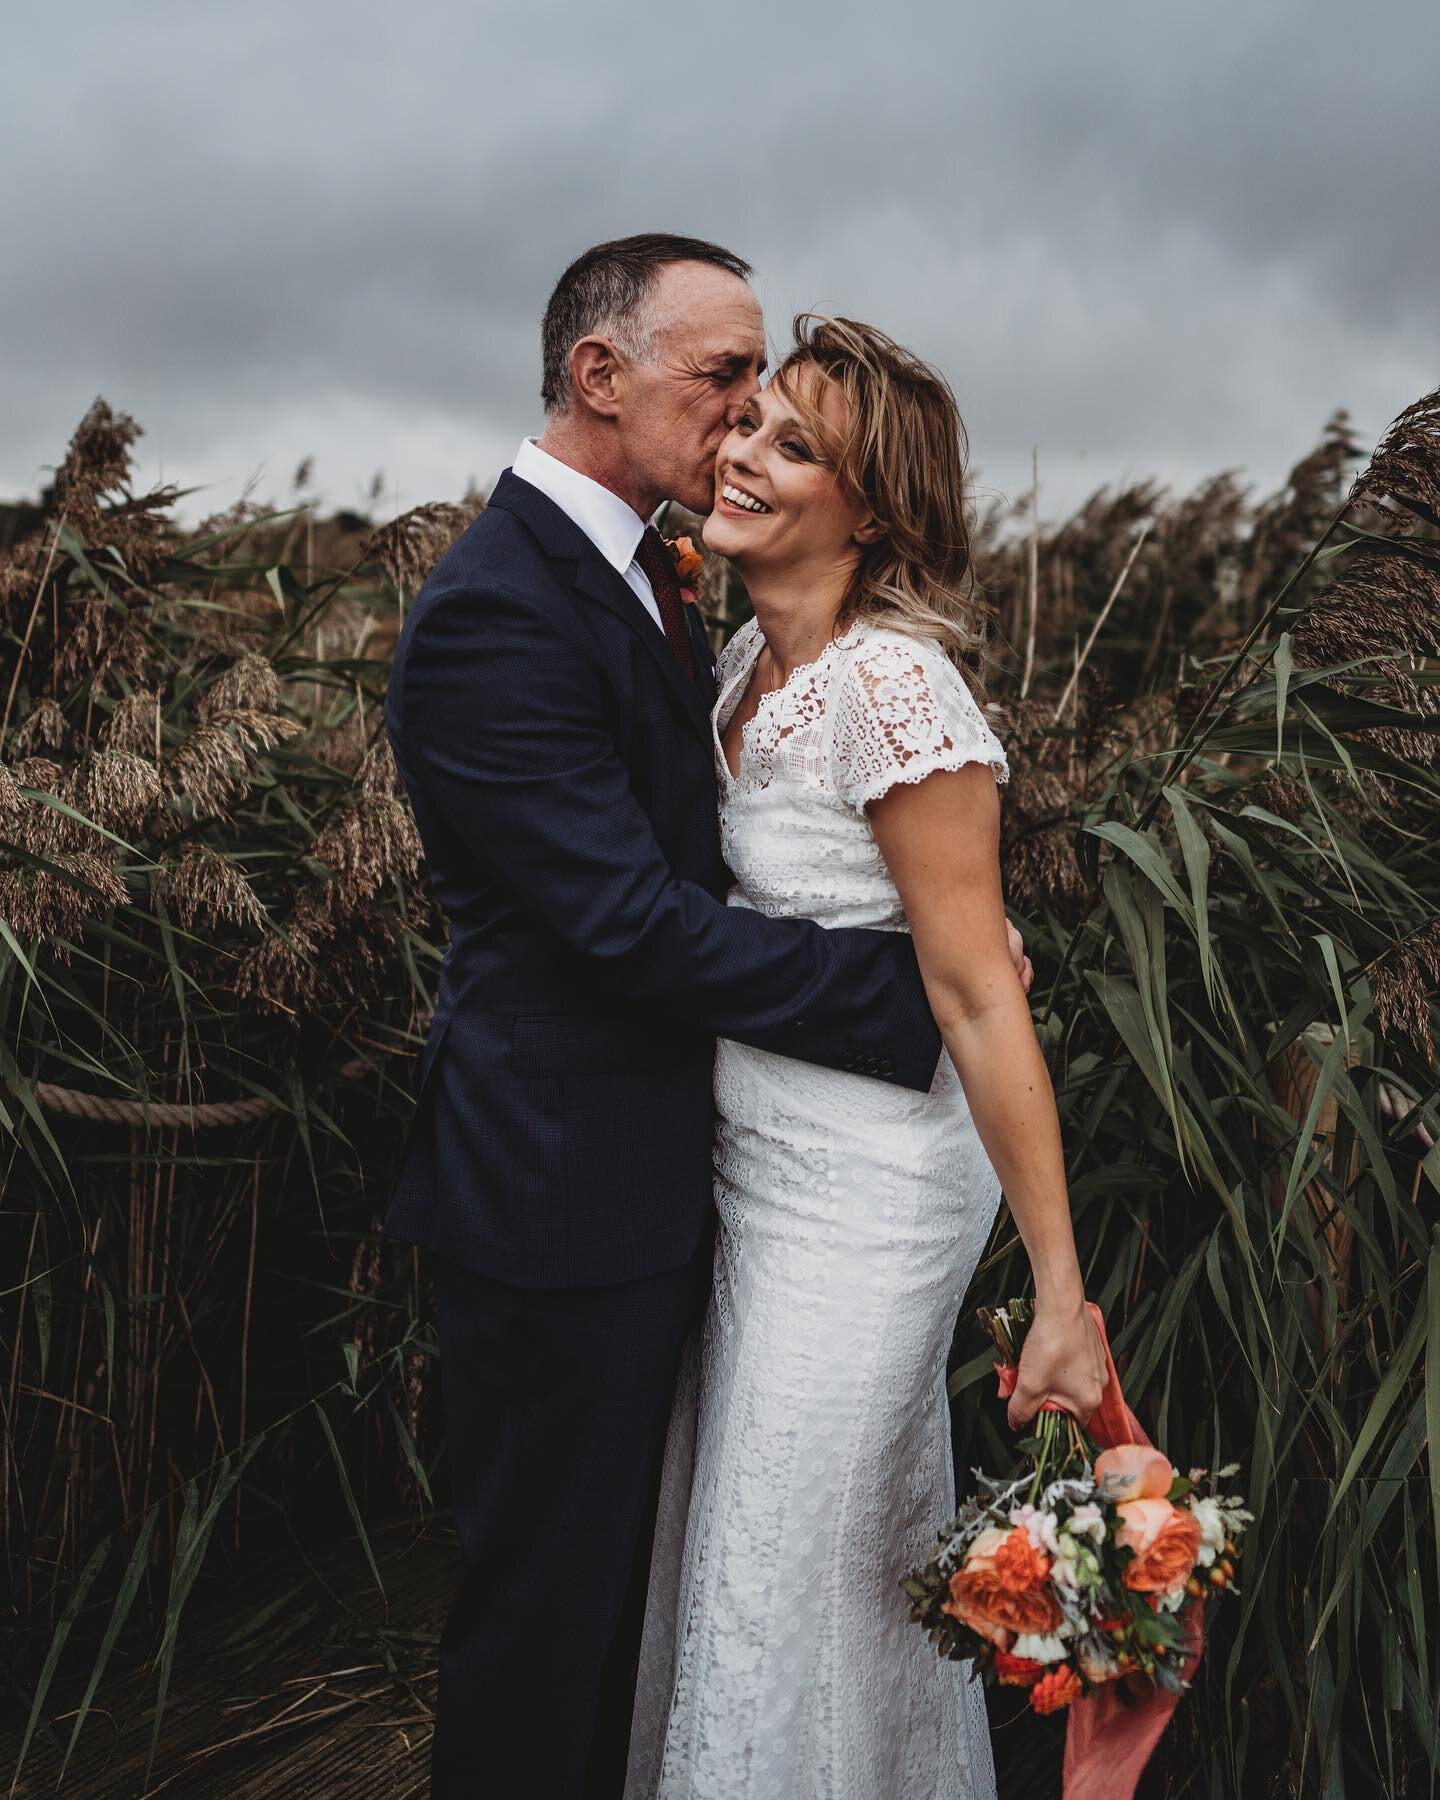 // SARAH &amp; PETE // 

At the gorgeous @cleywindmill for their intimate wedding earlier this month! They had every weather imaginable thrown at them.. the first shot was taken in what can only be described at a full blown hurricane! But these two e